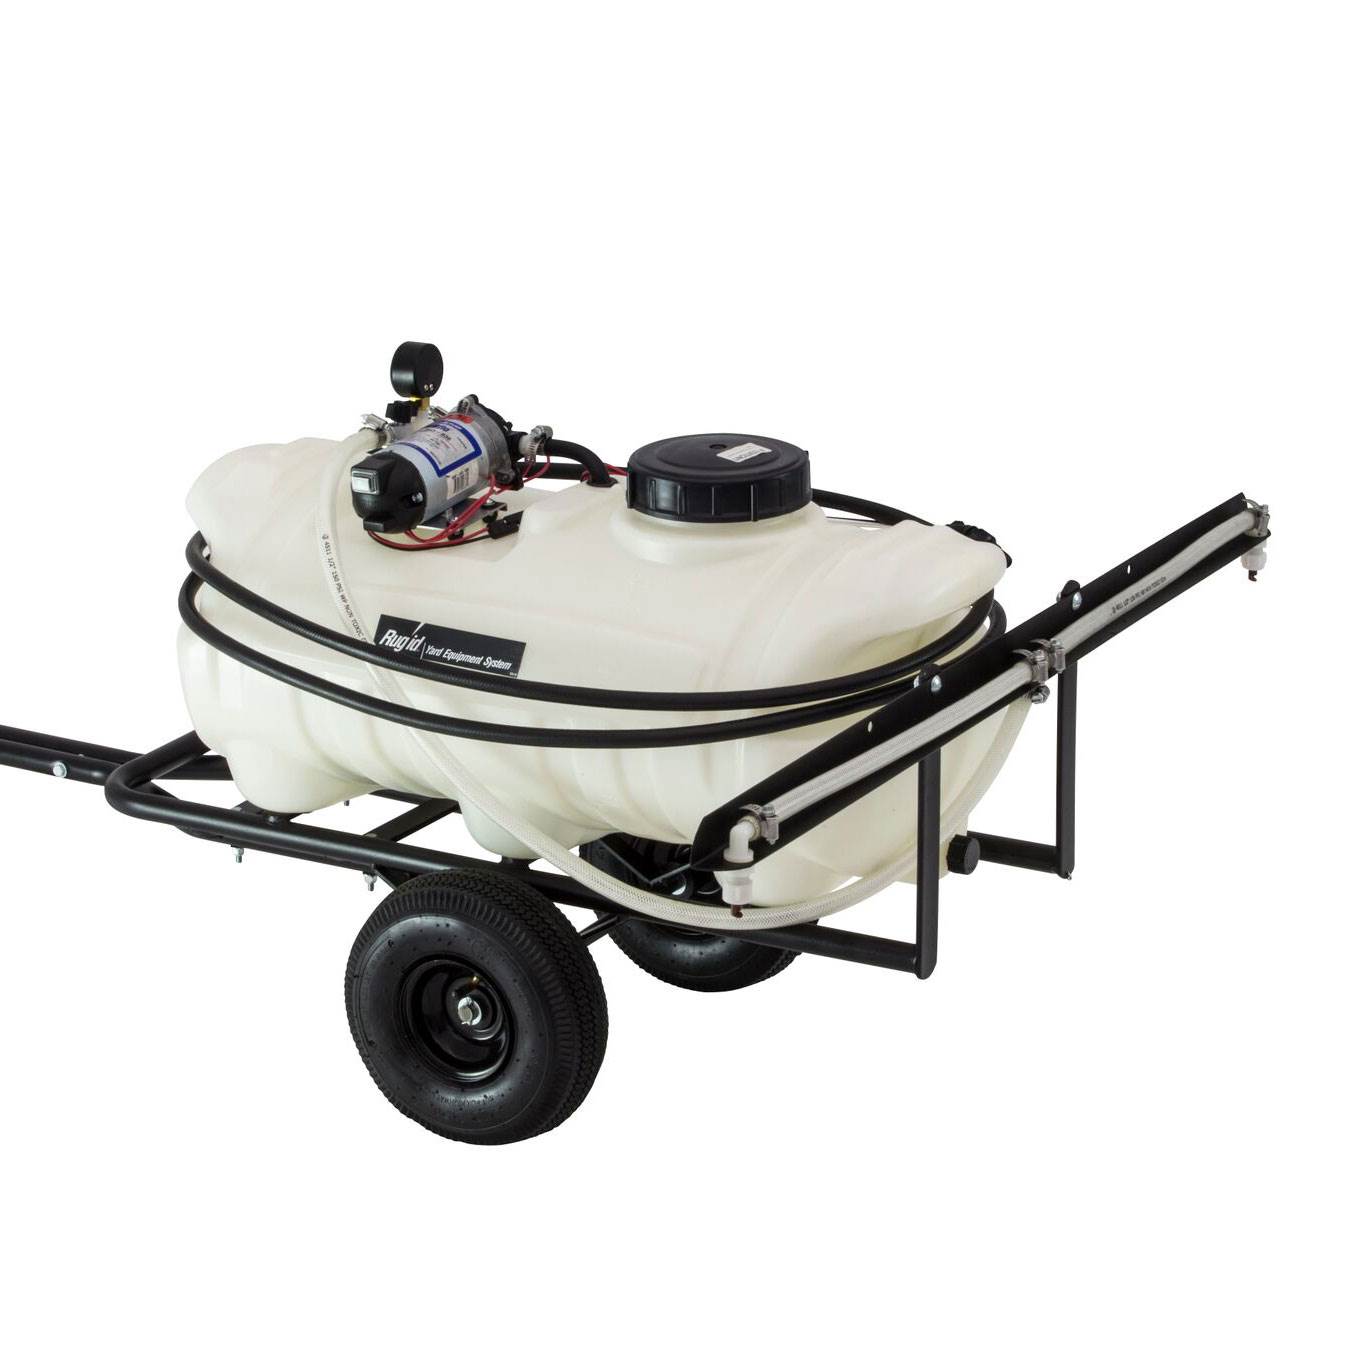 Precision Products 15 Gallon 12 Volt ATV Tractor Mount Trailing Sprayer Tank - image 2 of 6